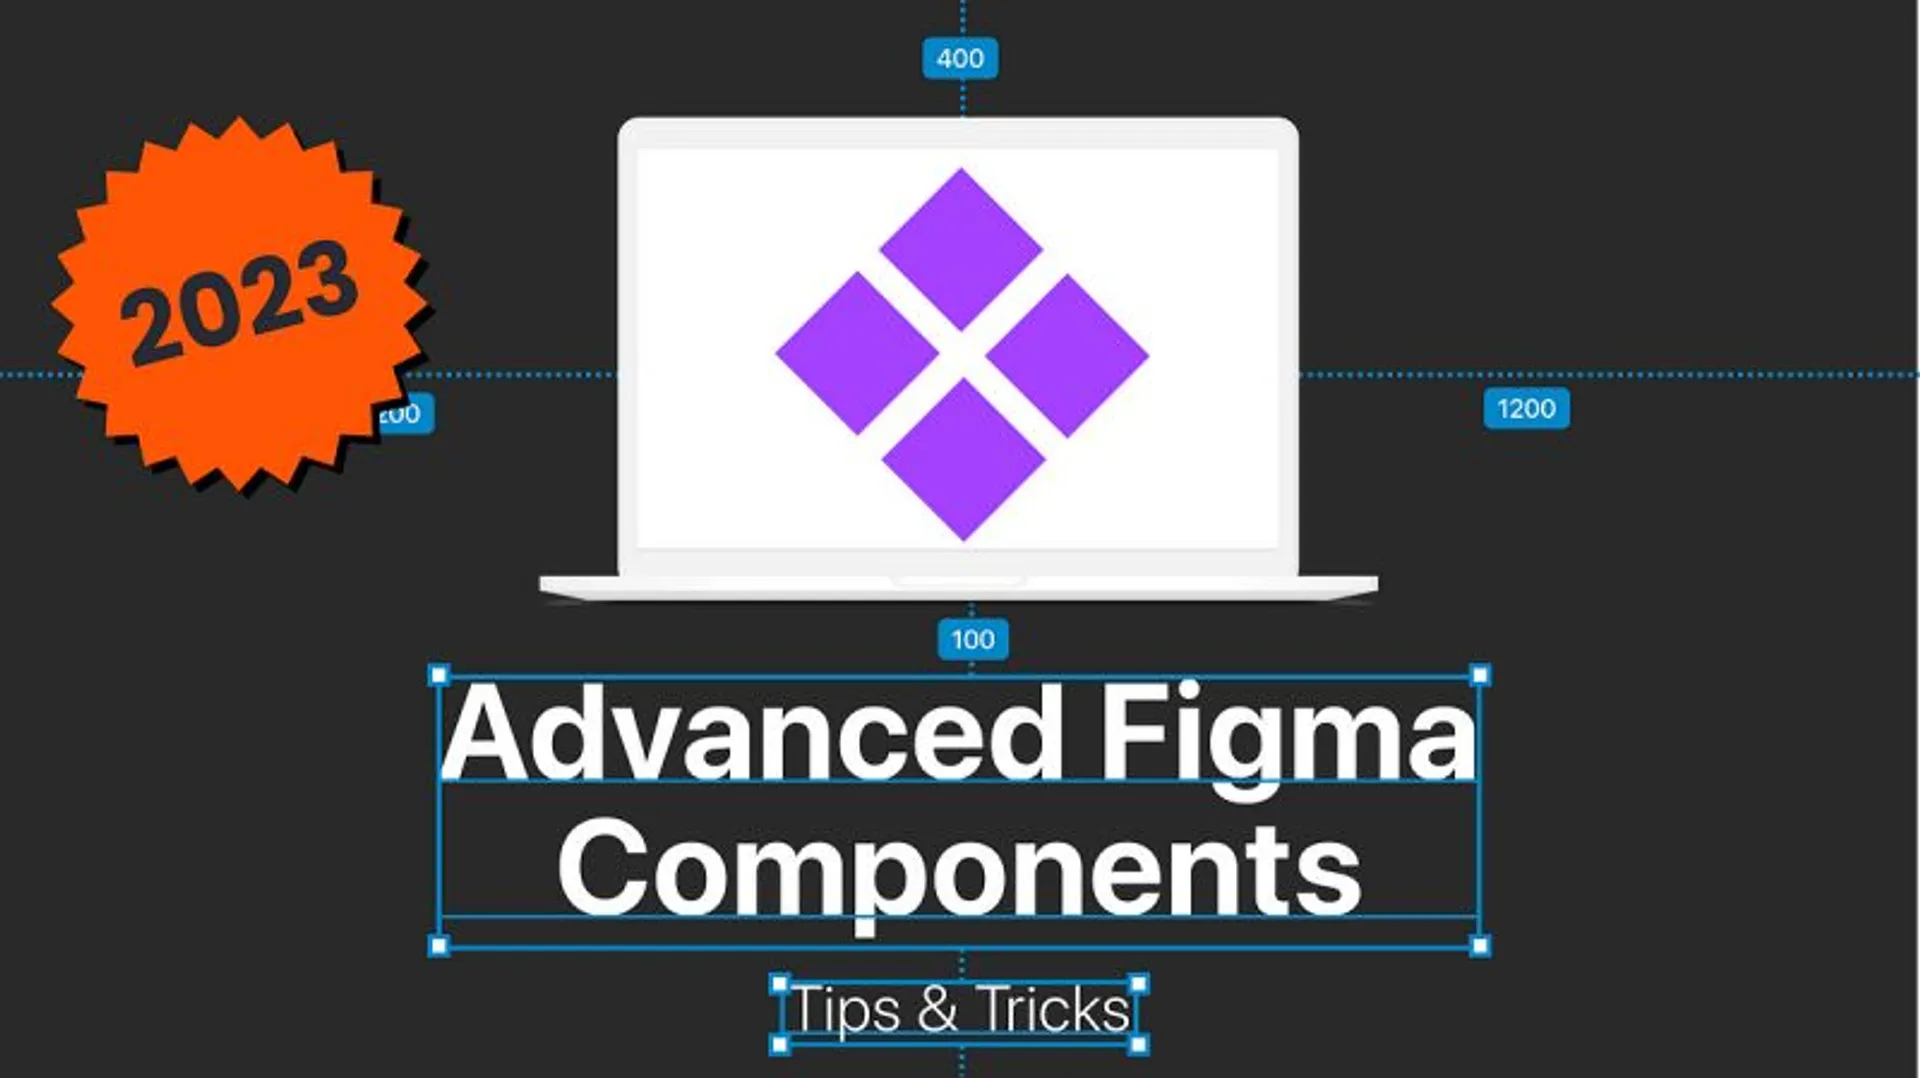 Make your components more structural 🎯

https://uxdesign.cc/advanced-figma-components-tips-tricks-little-gems-we-love-27c276130e9f